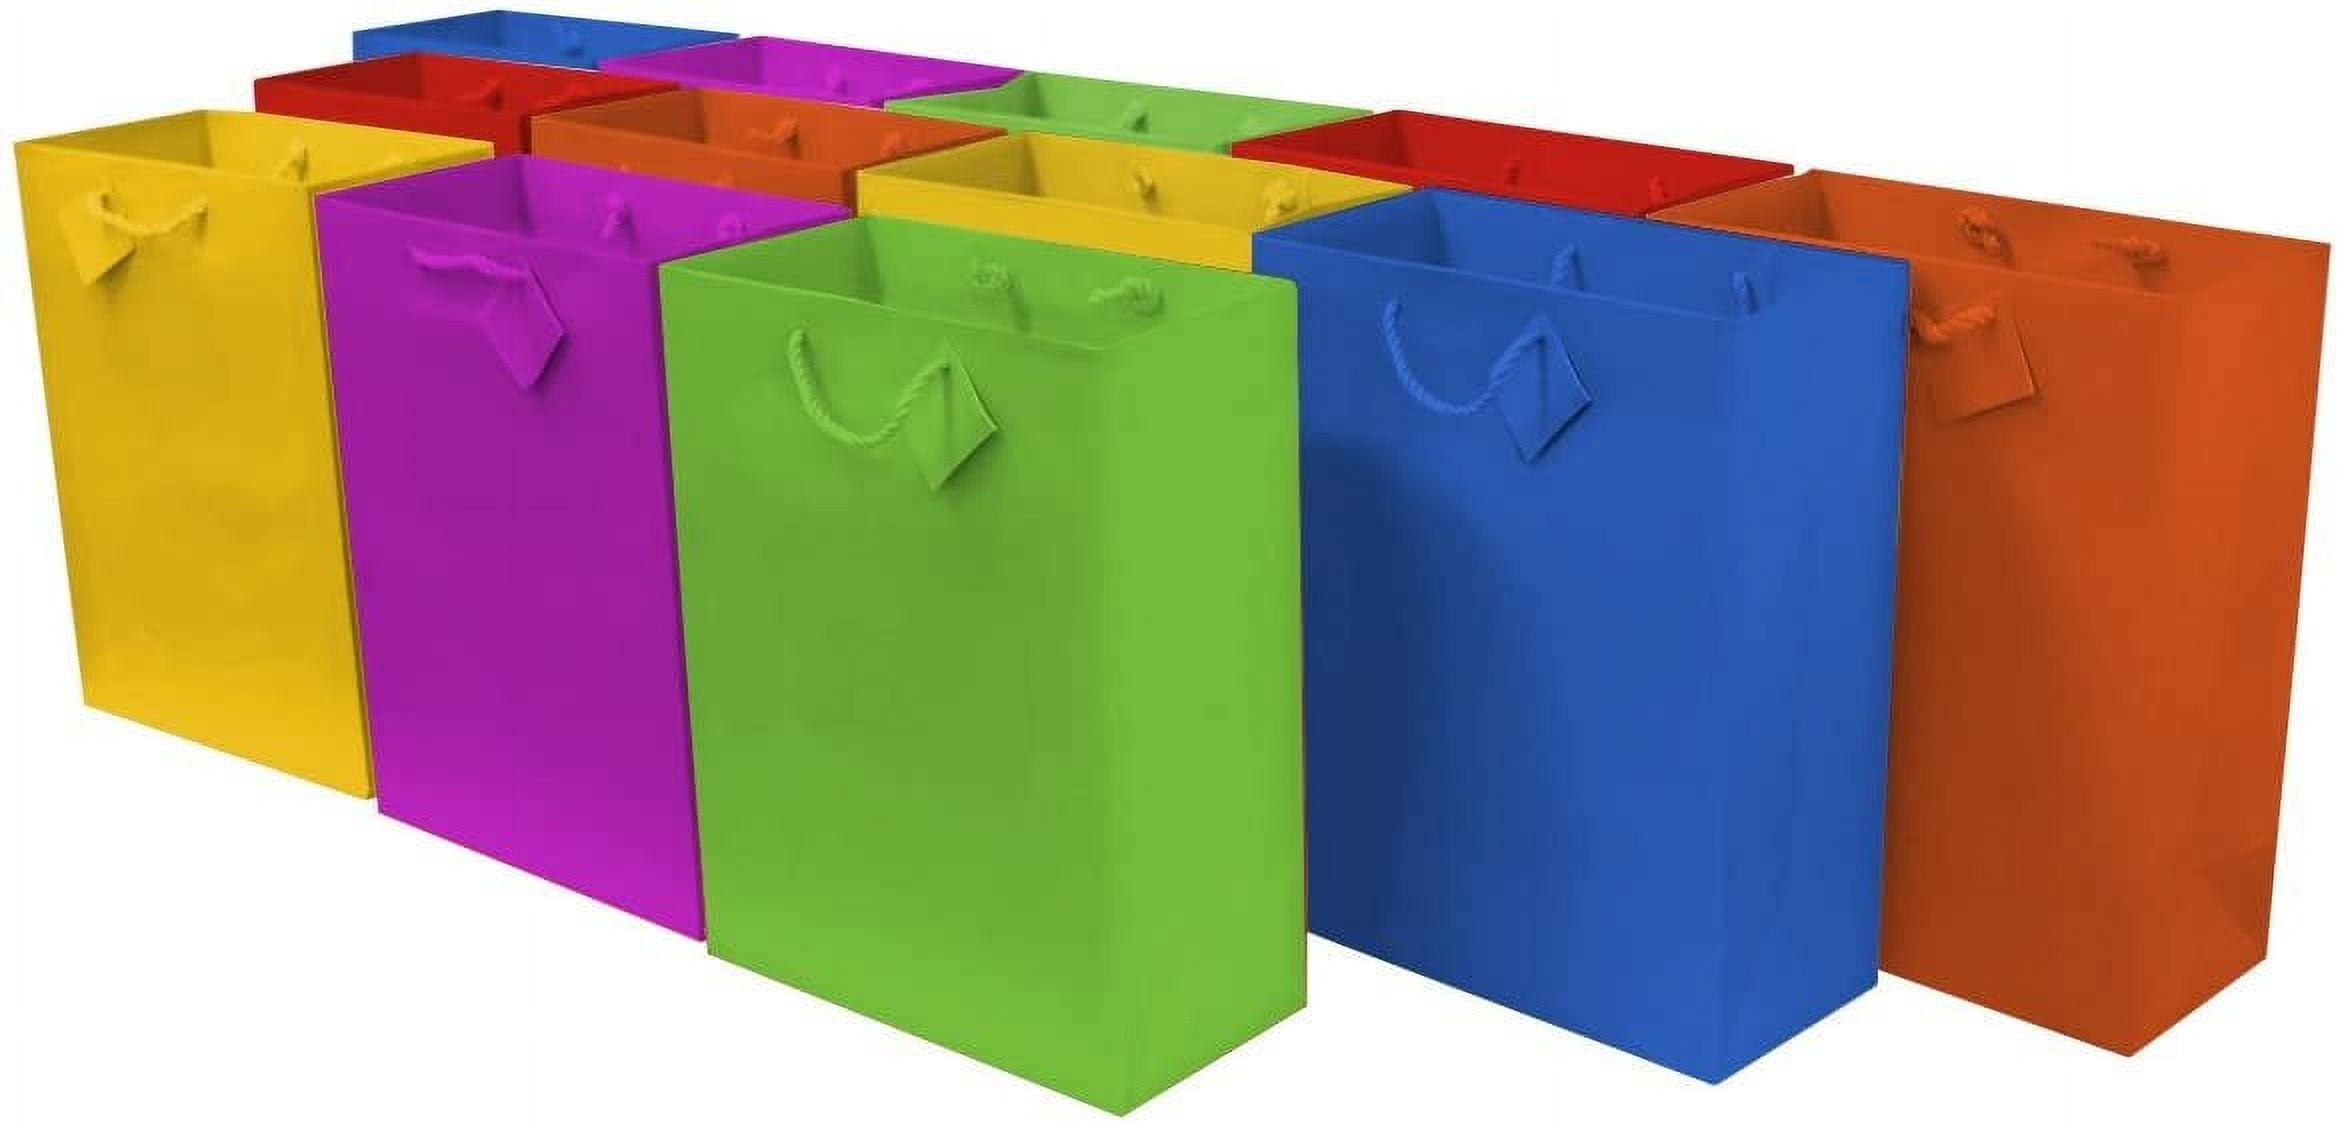 Multi-Color Neon Gift bags with Handles, Designer Paper Gift Wrap Bags for  Birthdays, Party Favors, Baby Shower, Bachelorette, Weddings, Holidays,  Extra Small Size, Bulk 12 Pcs – 4x2.75x4.5 